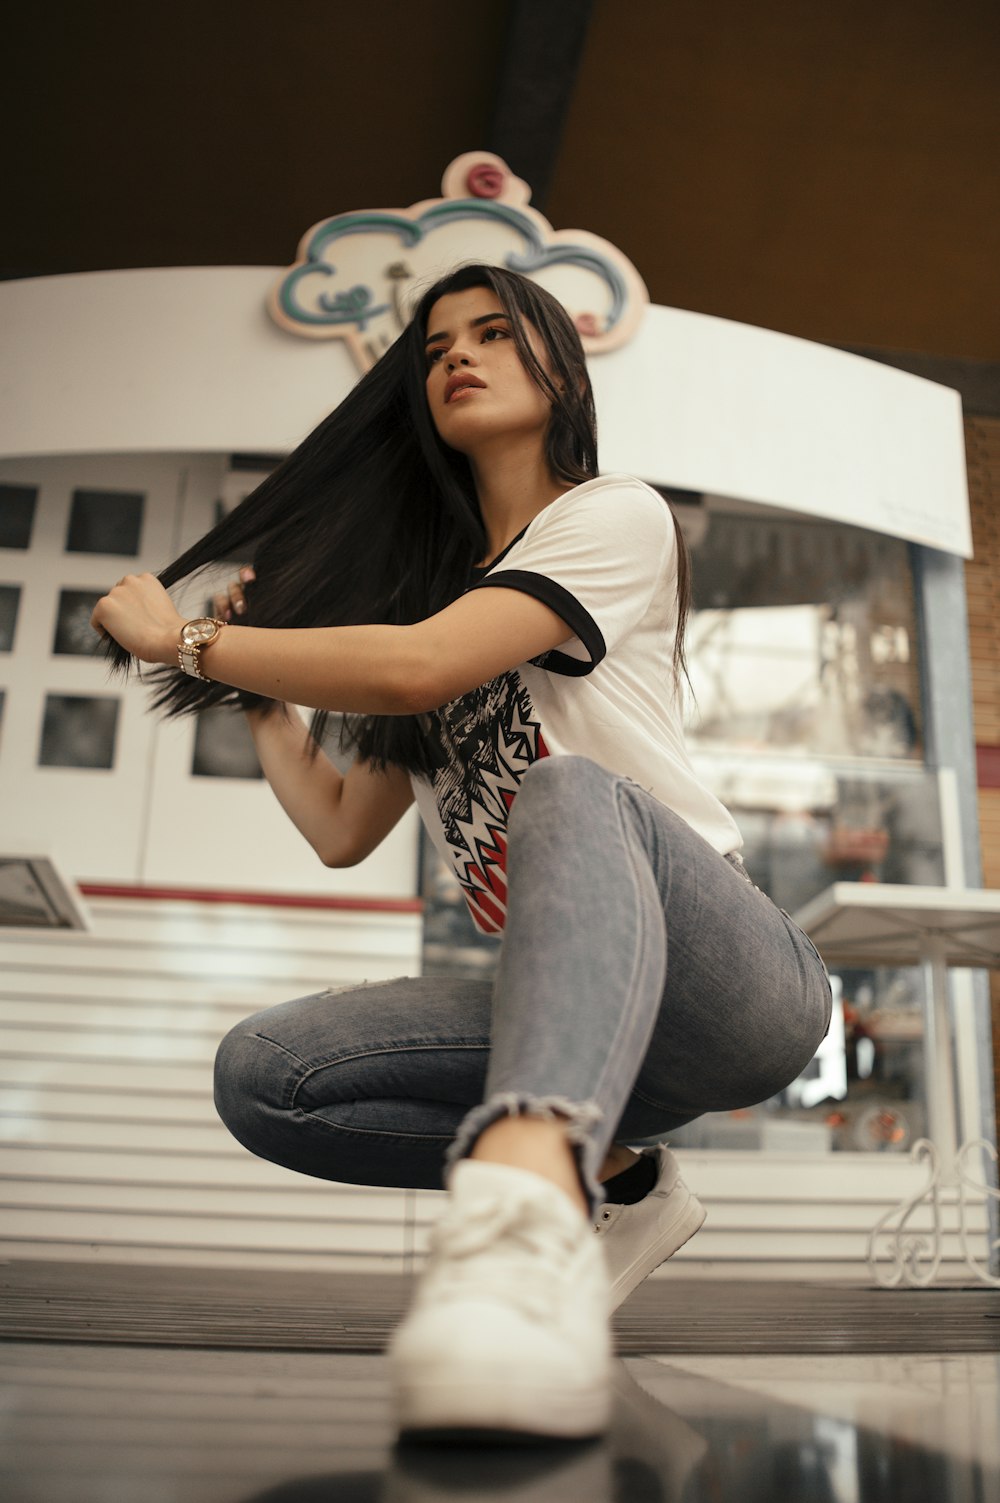 Woman In White T Shirt With Blue Denim Jeans With Sneakers Photo Free Fashion Image On Unsplash